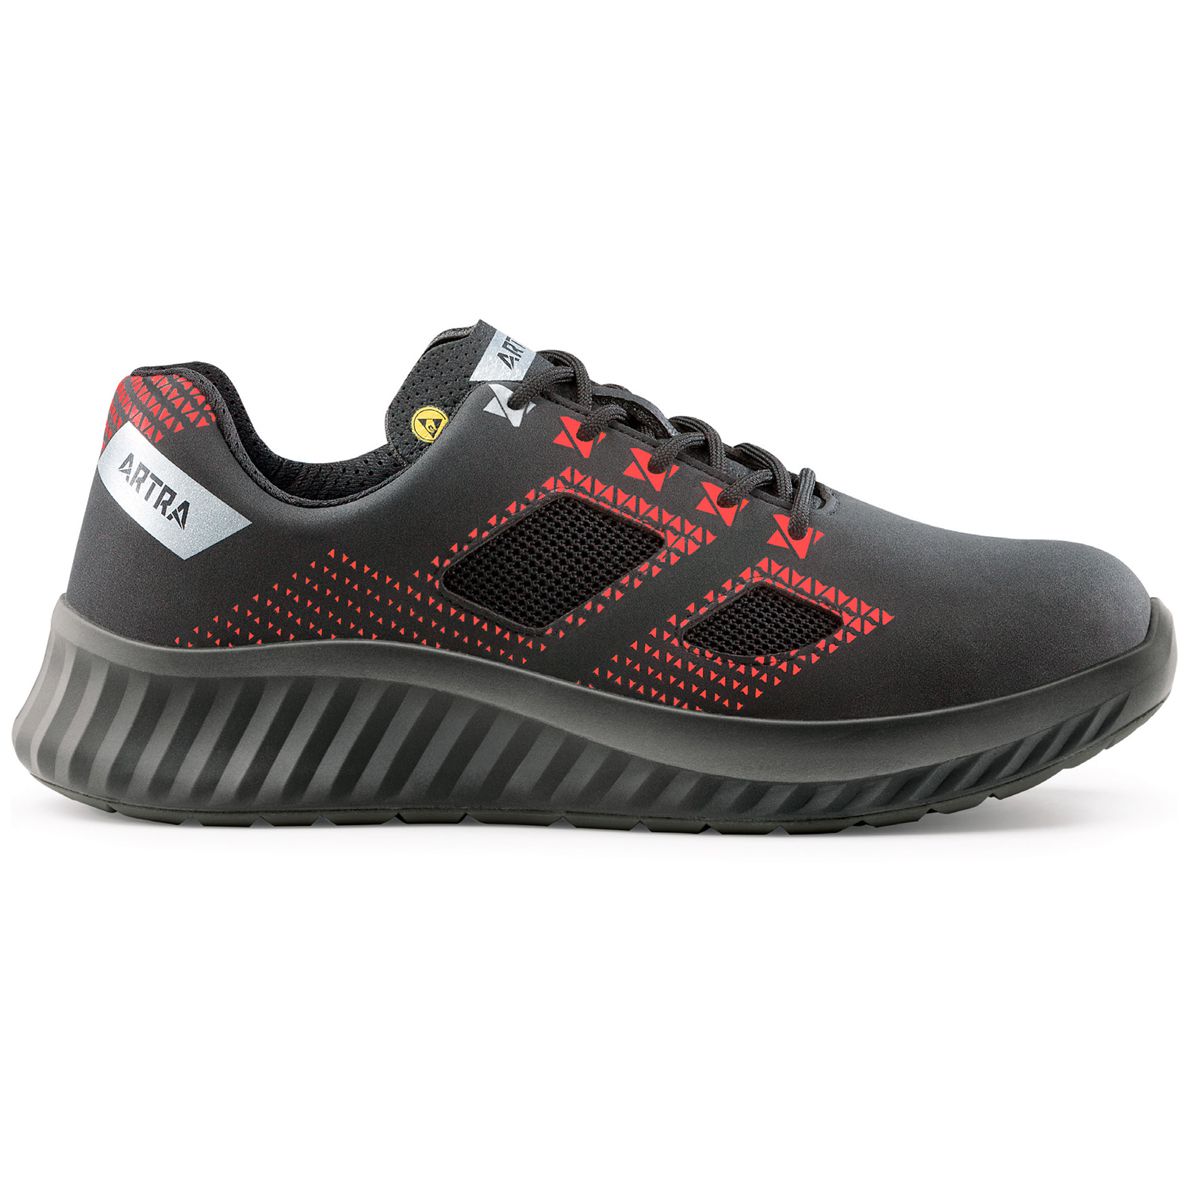 SALE: ARTRA Arcasio Work & Safety Shoes - S1-P SRC EED - Black/Red - 45